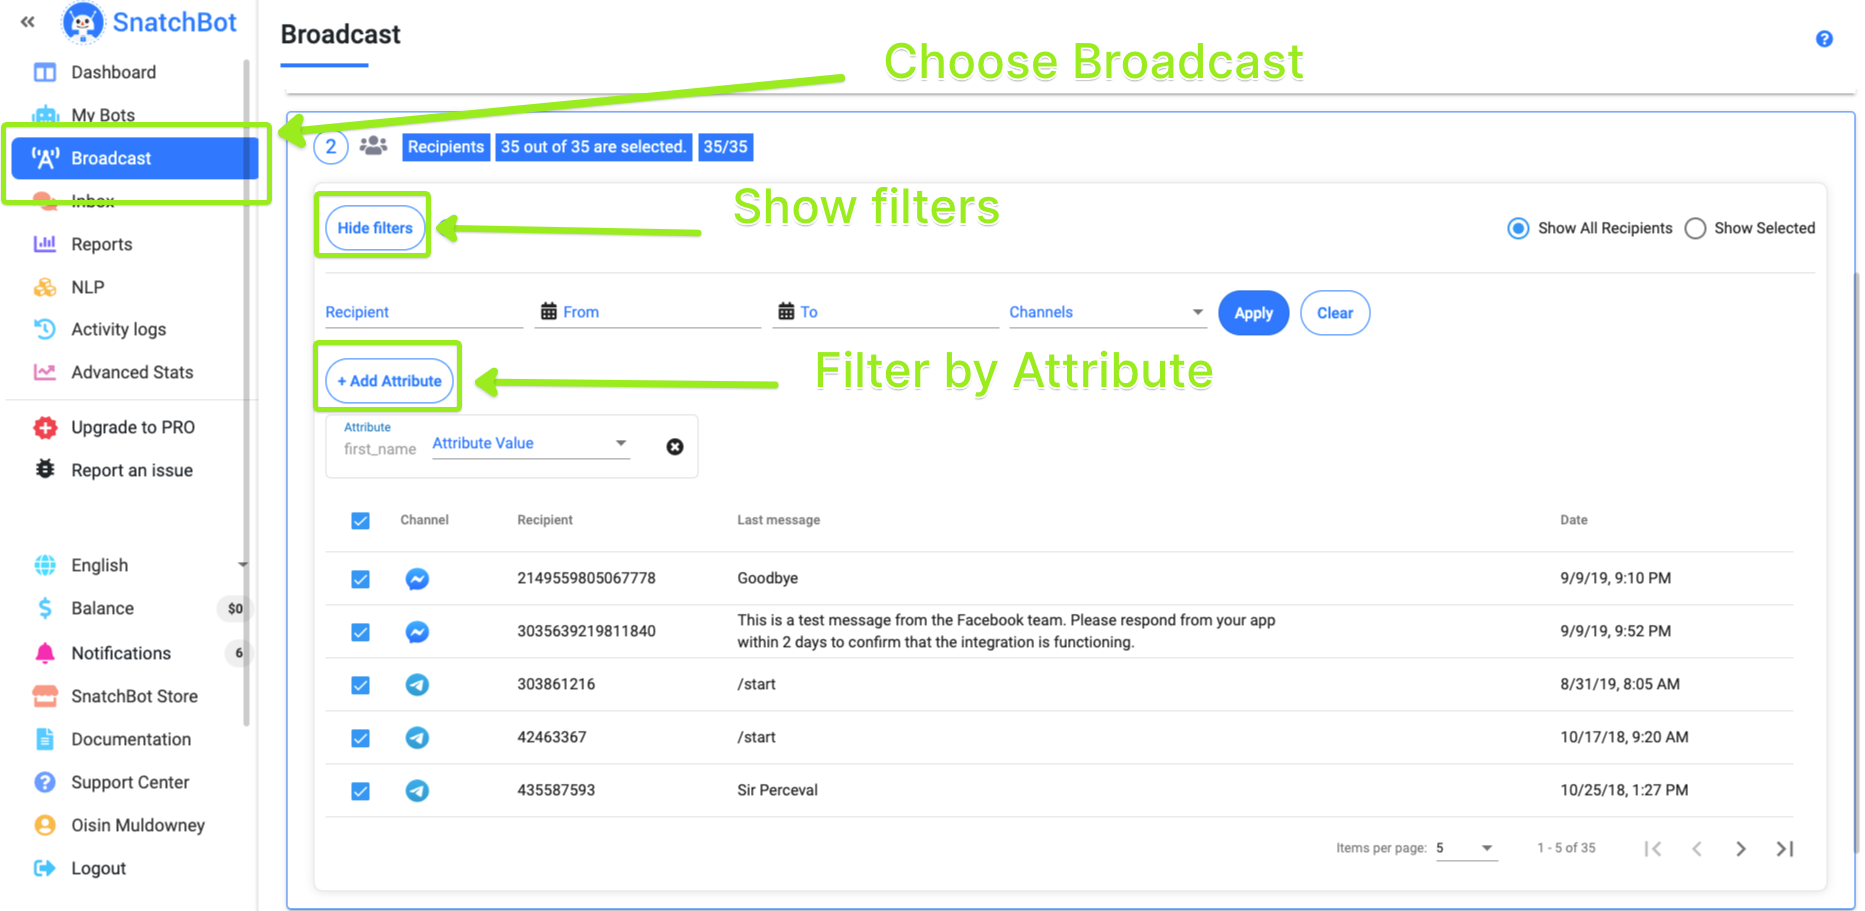 You can filter your Broadcast list by Attribute, allowing you to target your audience accurately.